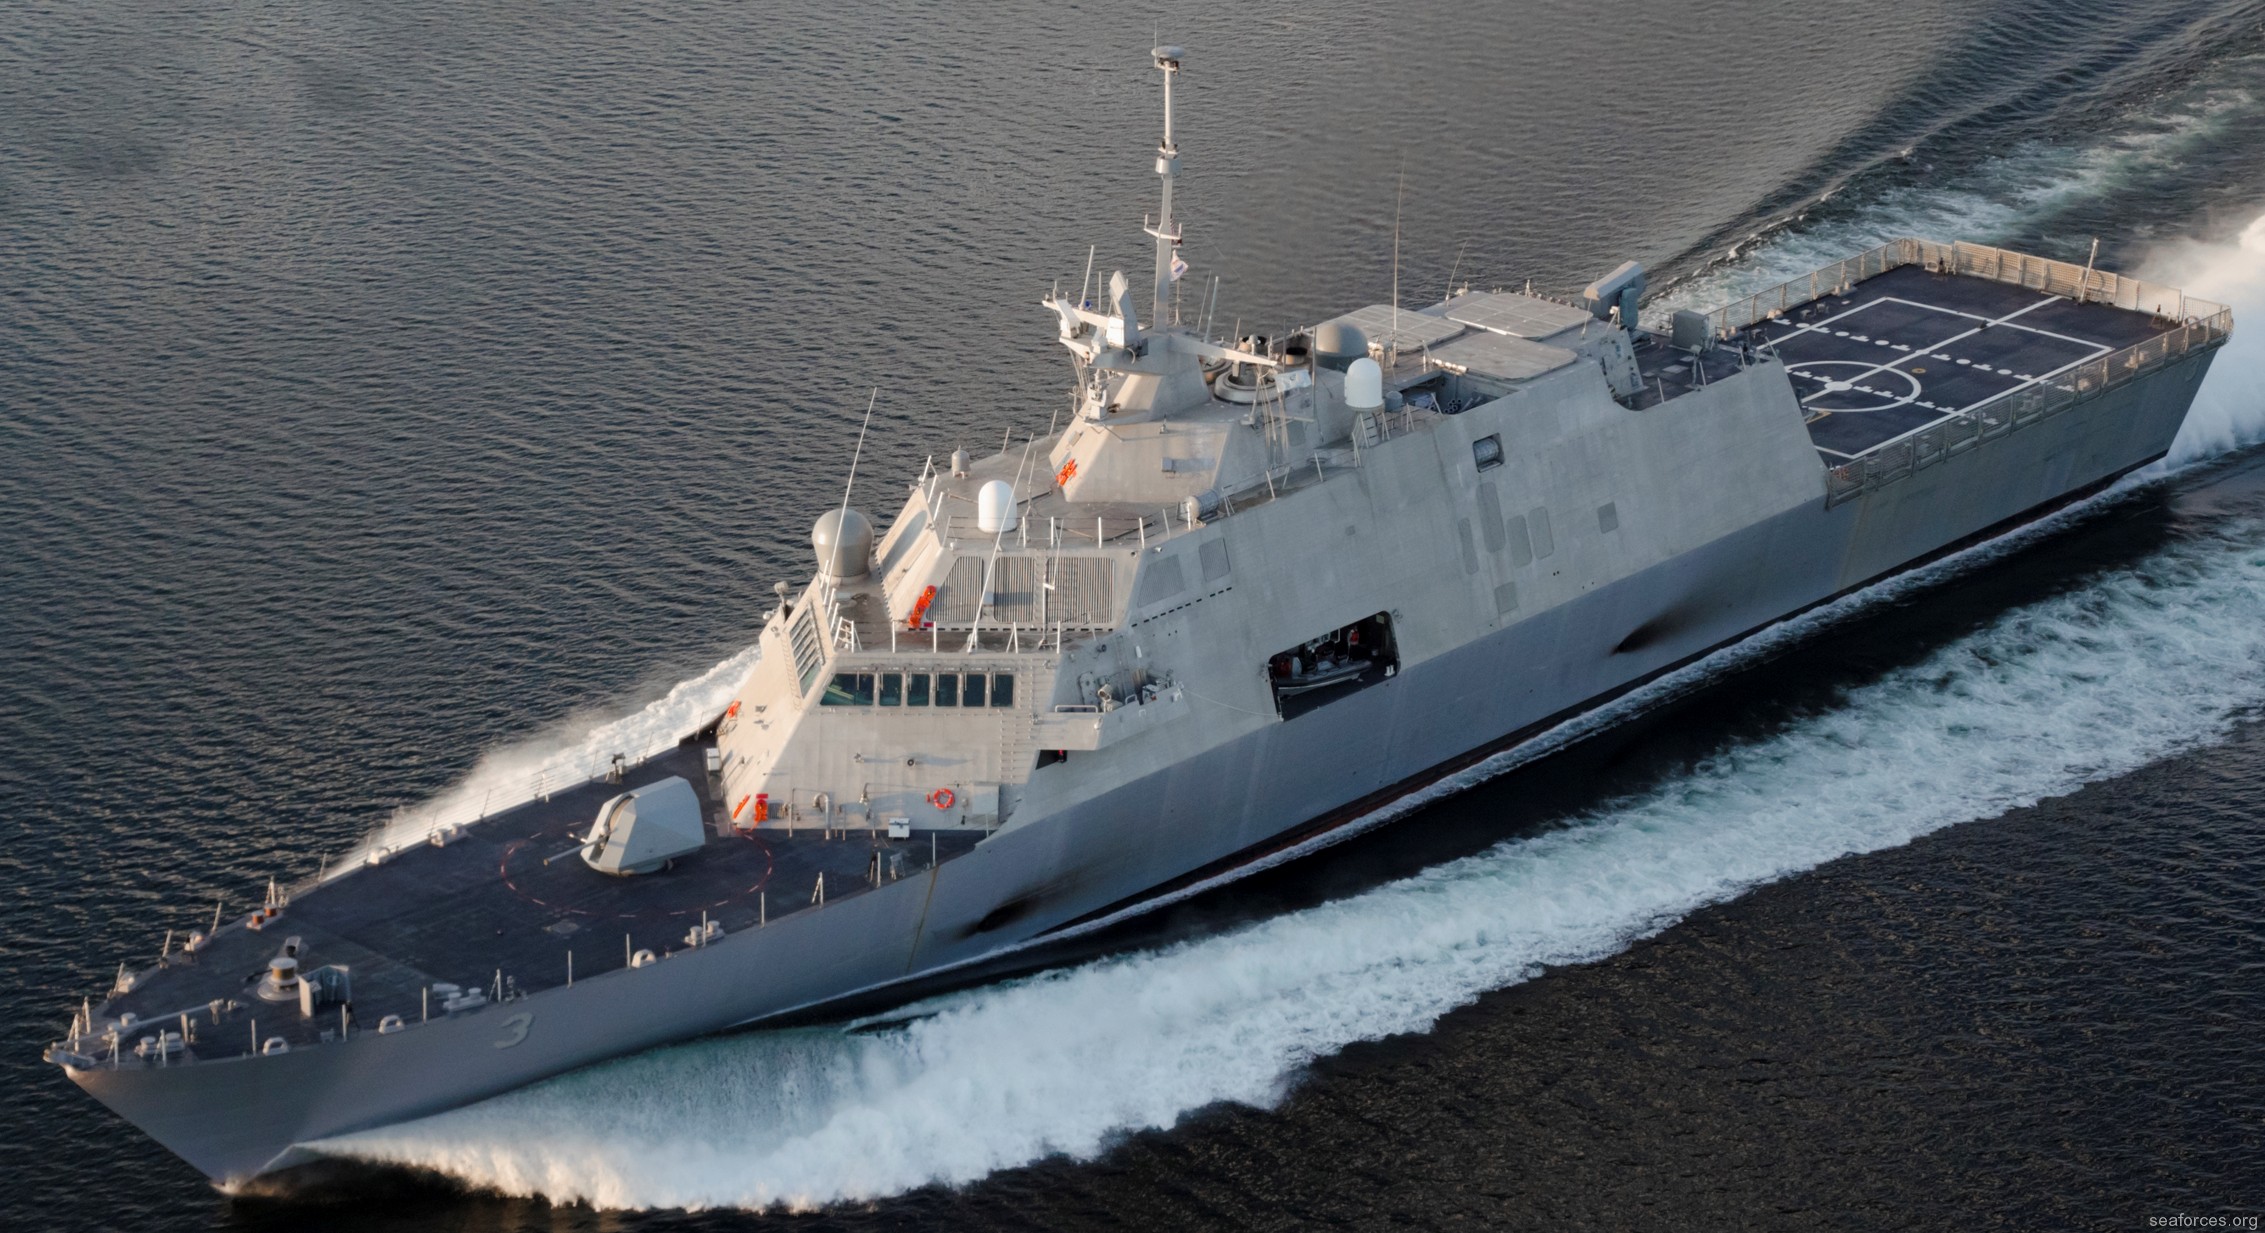 lcs-3 uss fort worth littoral combat ship freedom class us navy 53 trials